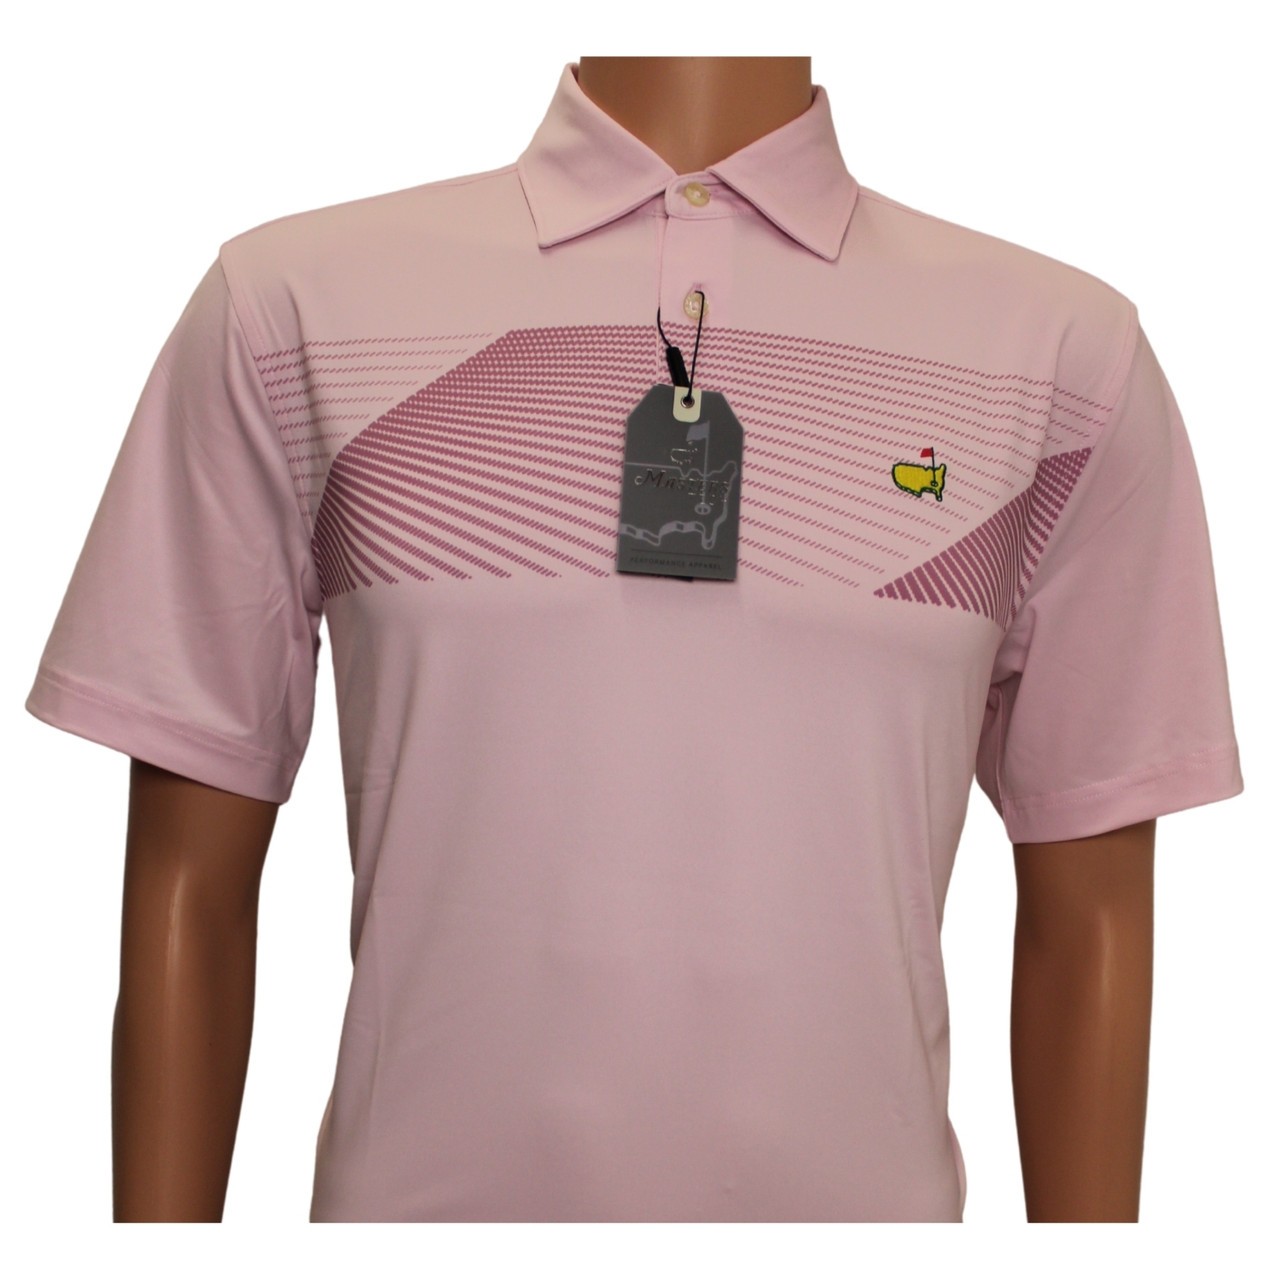 Masters Pink Performance Tech Shirt with Merlot Design - Small Only